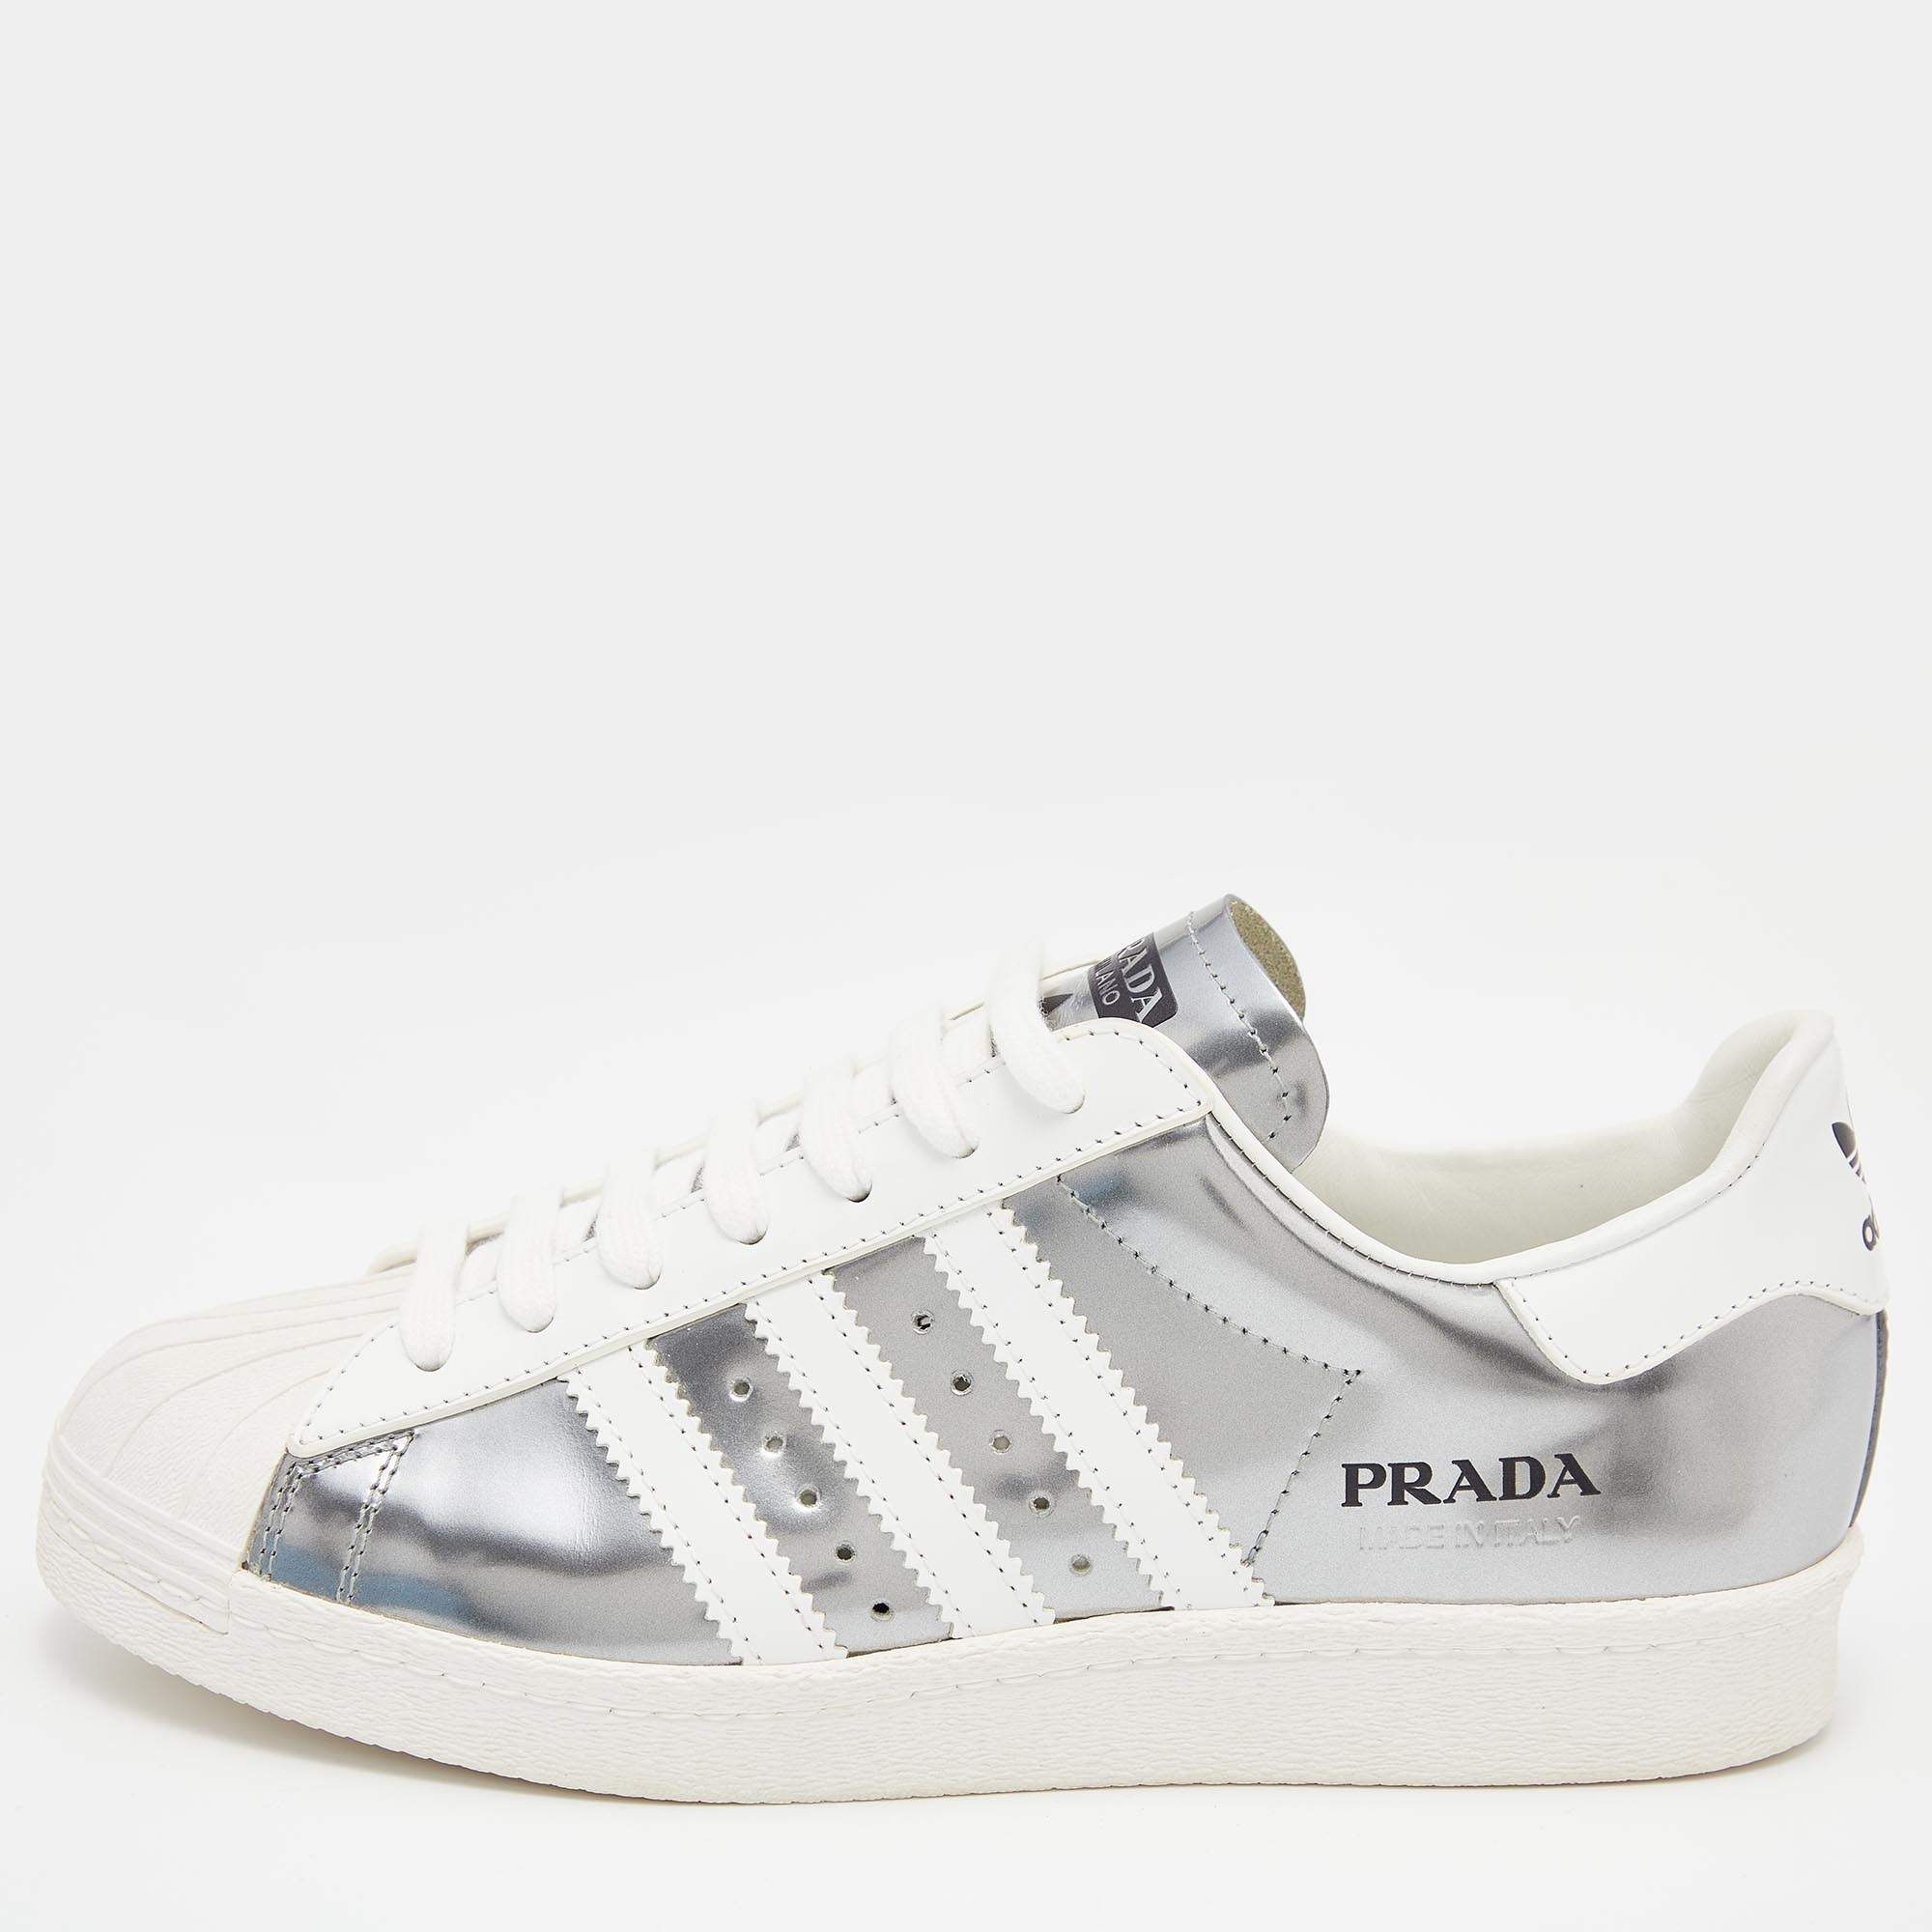 Prada x Adidas White/Silver Leather Superstar Low Top Sneakers Size 39 1/3